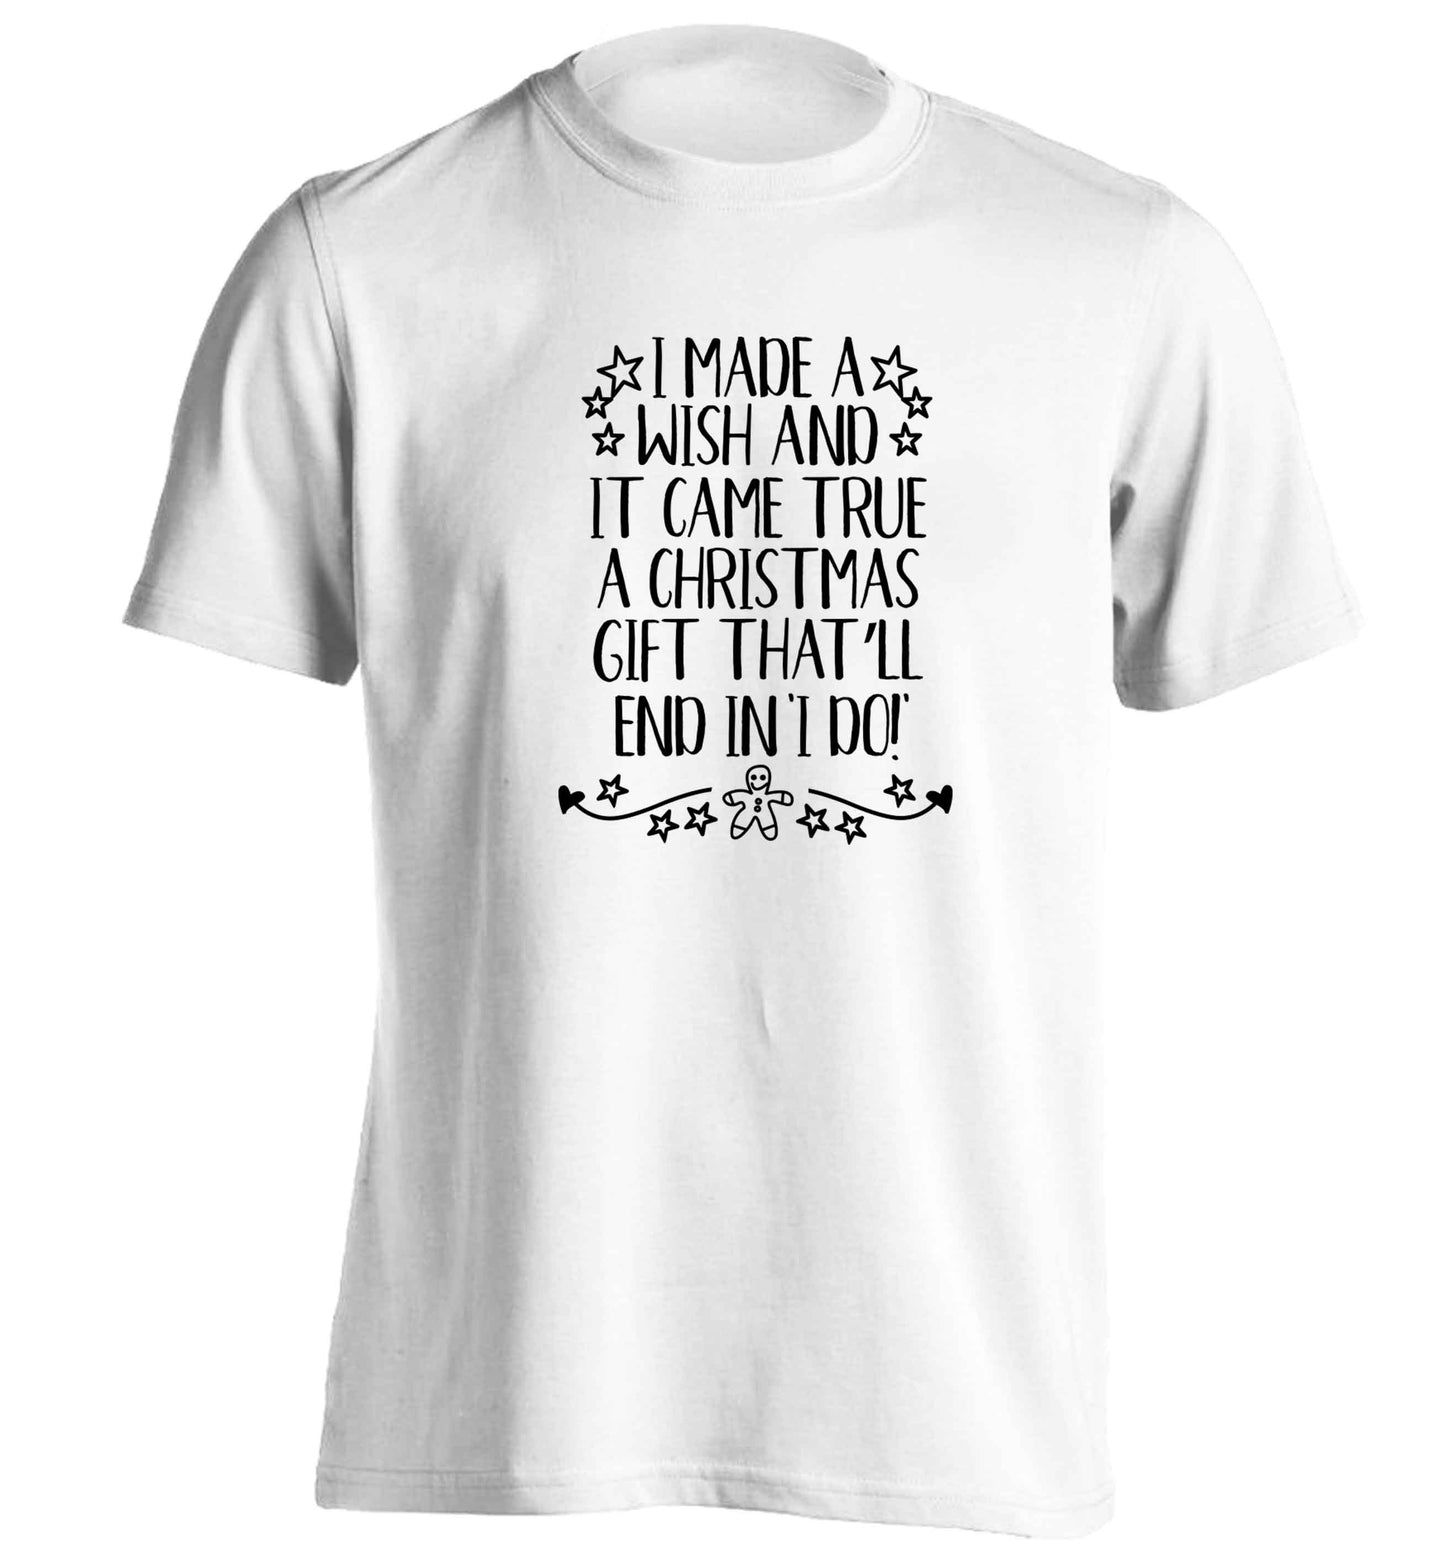 I made a wish and it came true a Christmas gift that'll end in 'I do' adults unisex white Tshirt 2XL